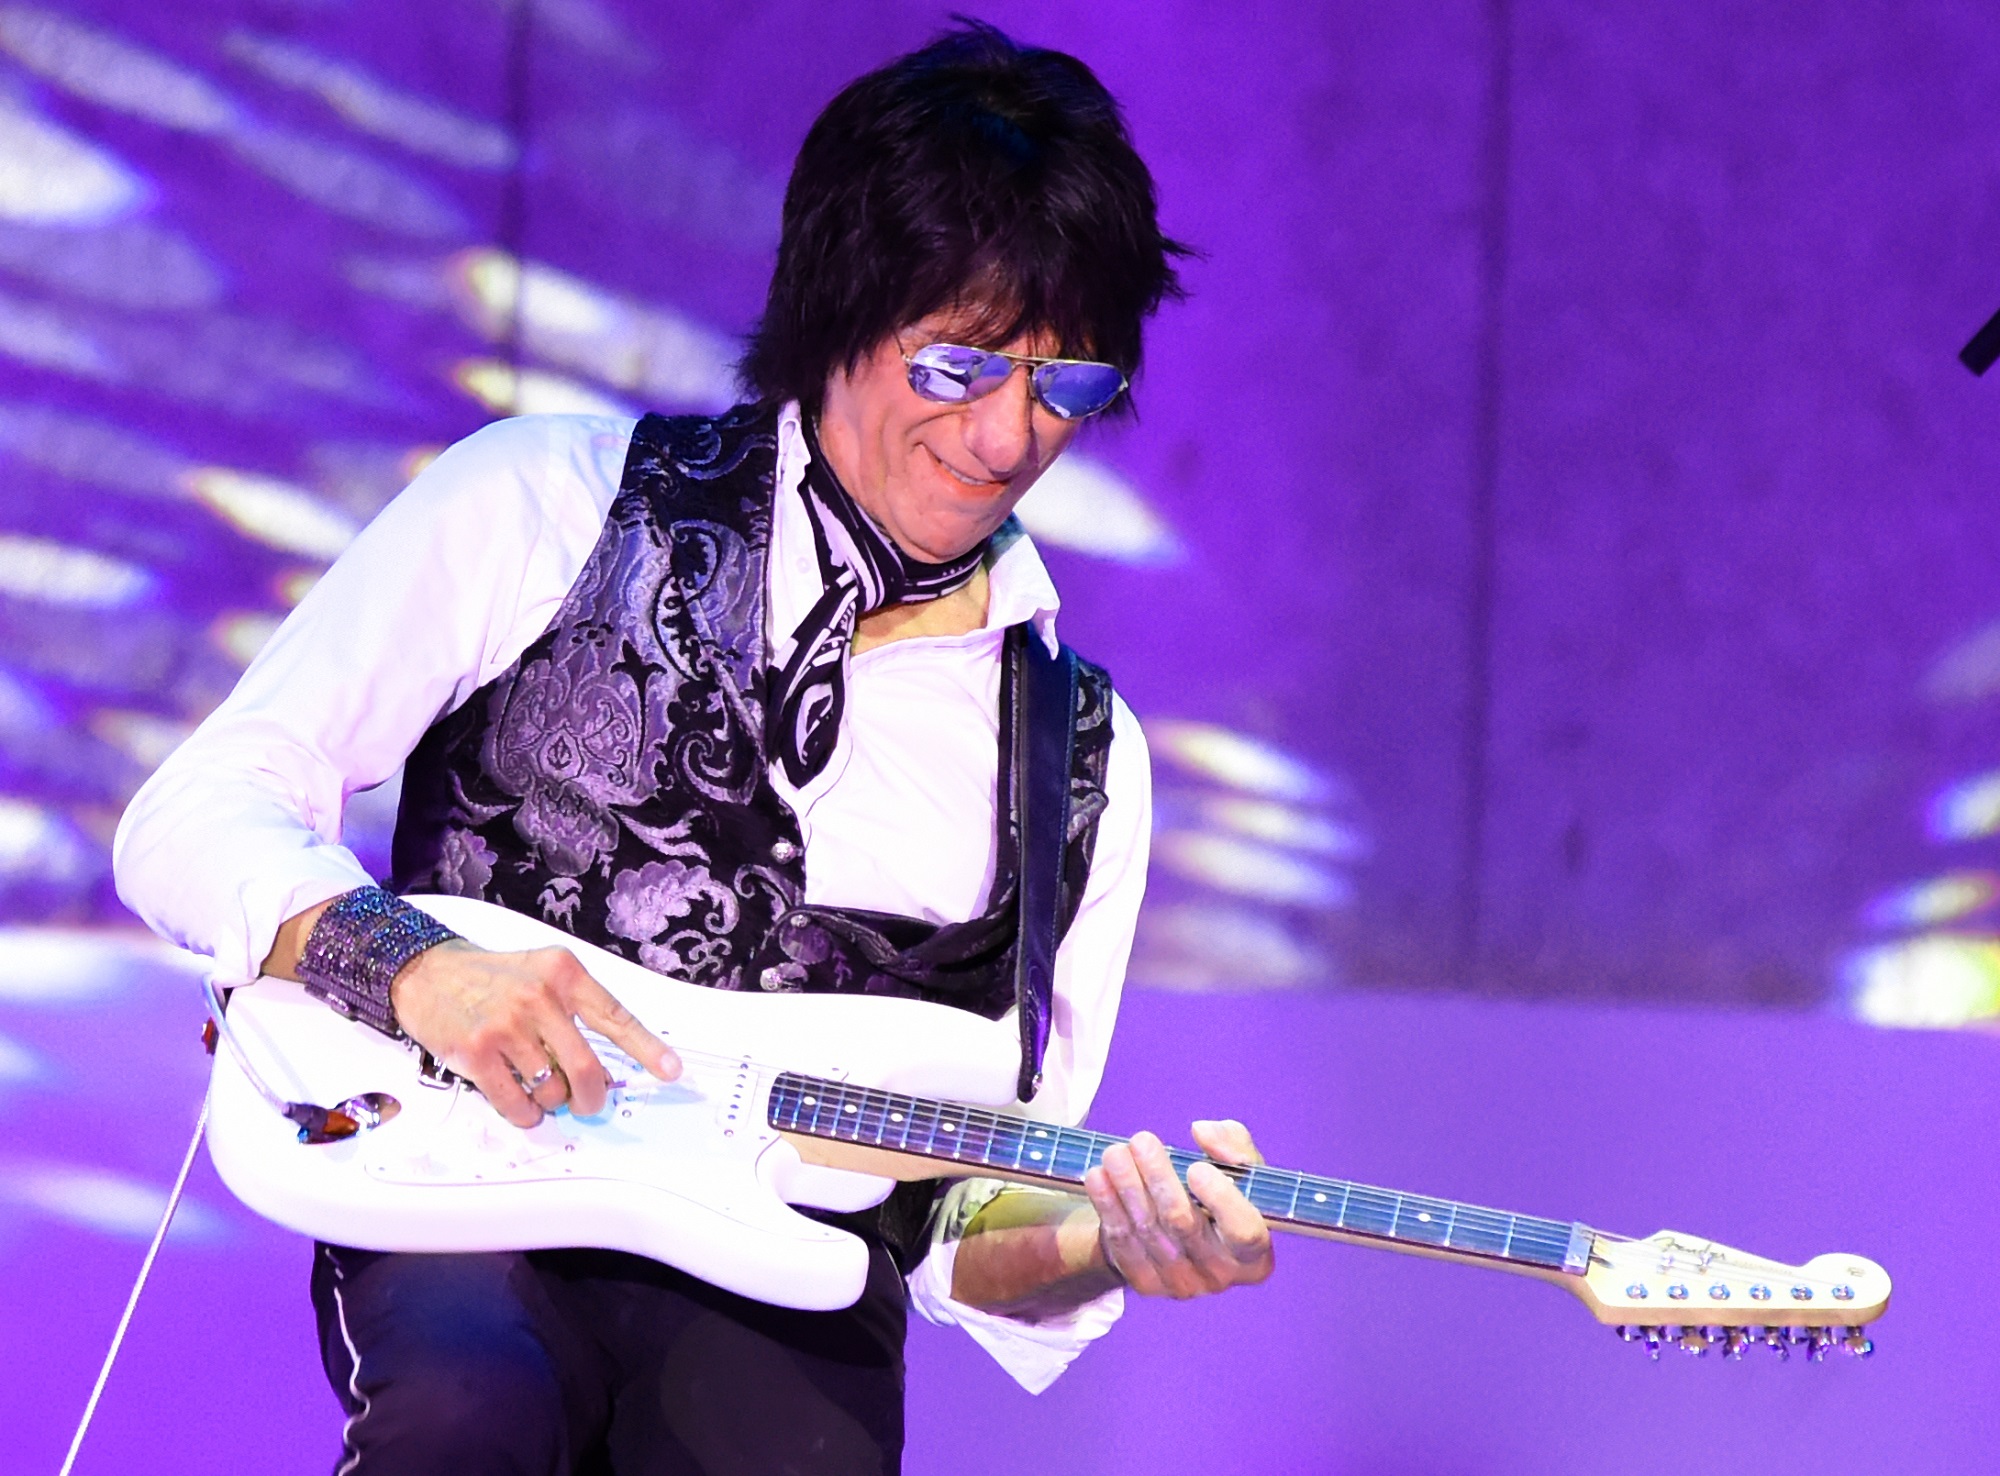 Former Yardbirds member Jeff Beck plays a white electric guitar on stage